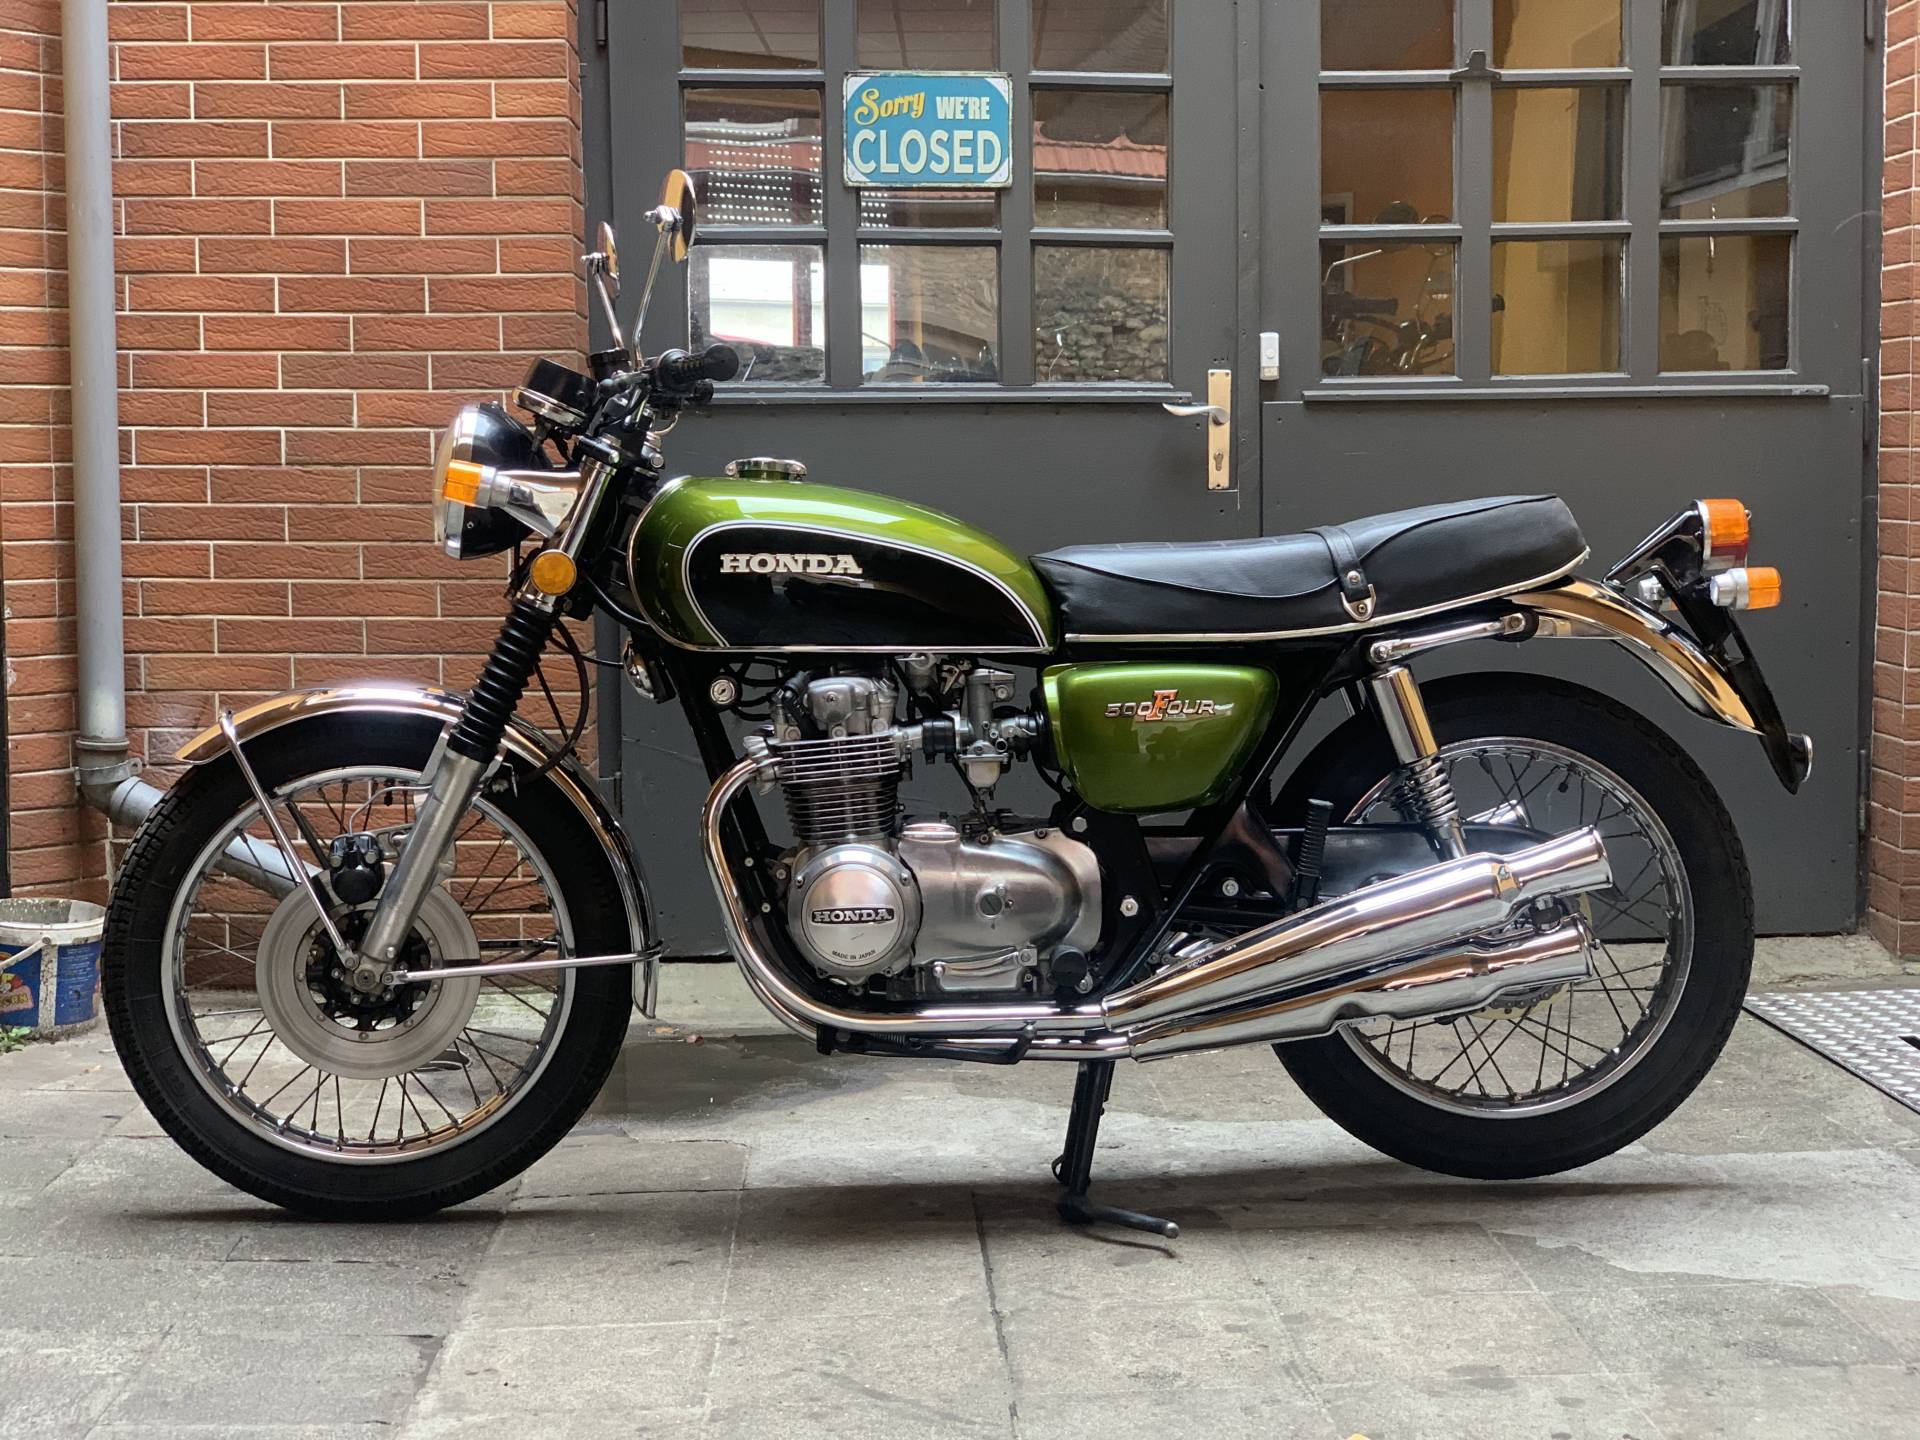 For Sale: Honda CB 500 Four (1973) offered for AUD 12,913